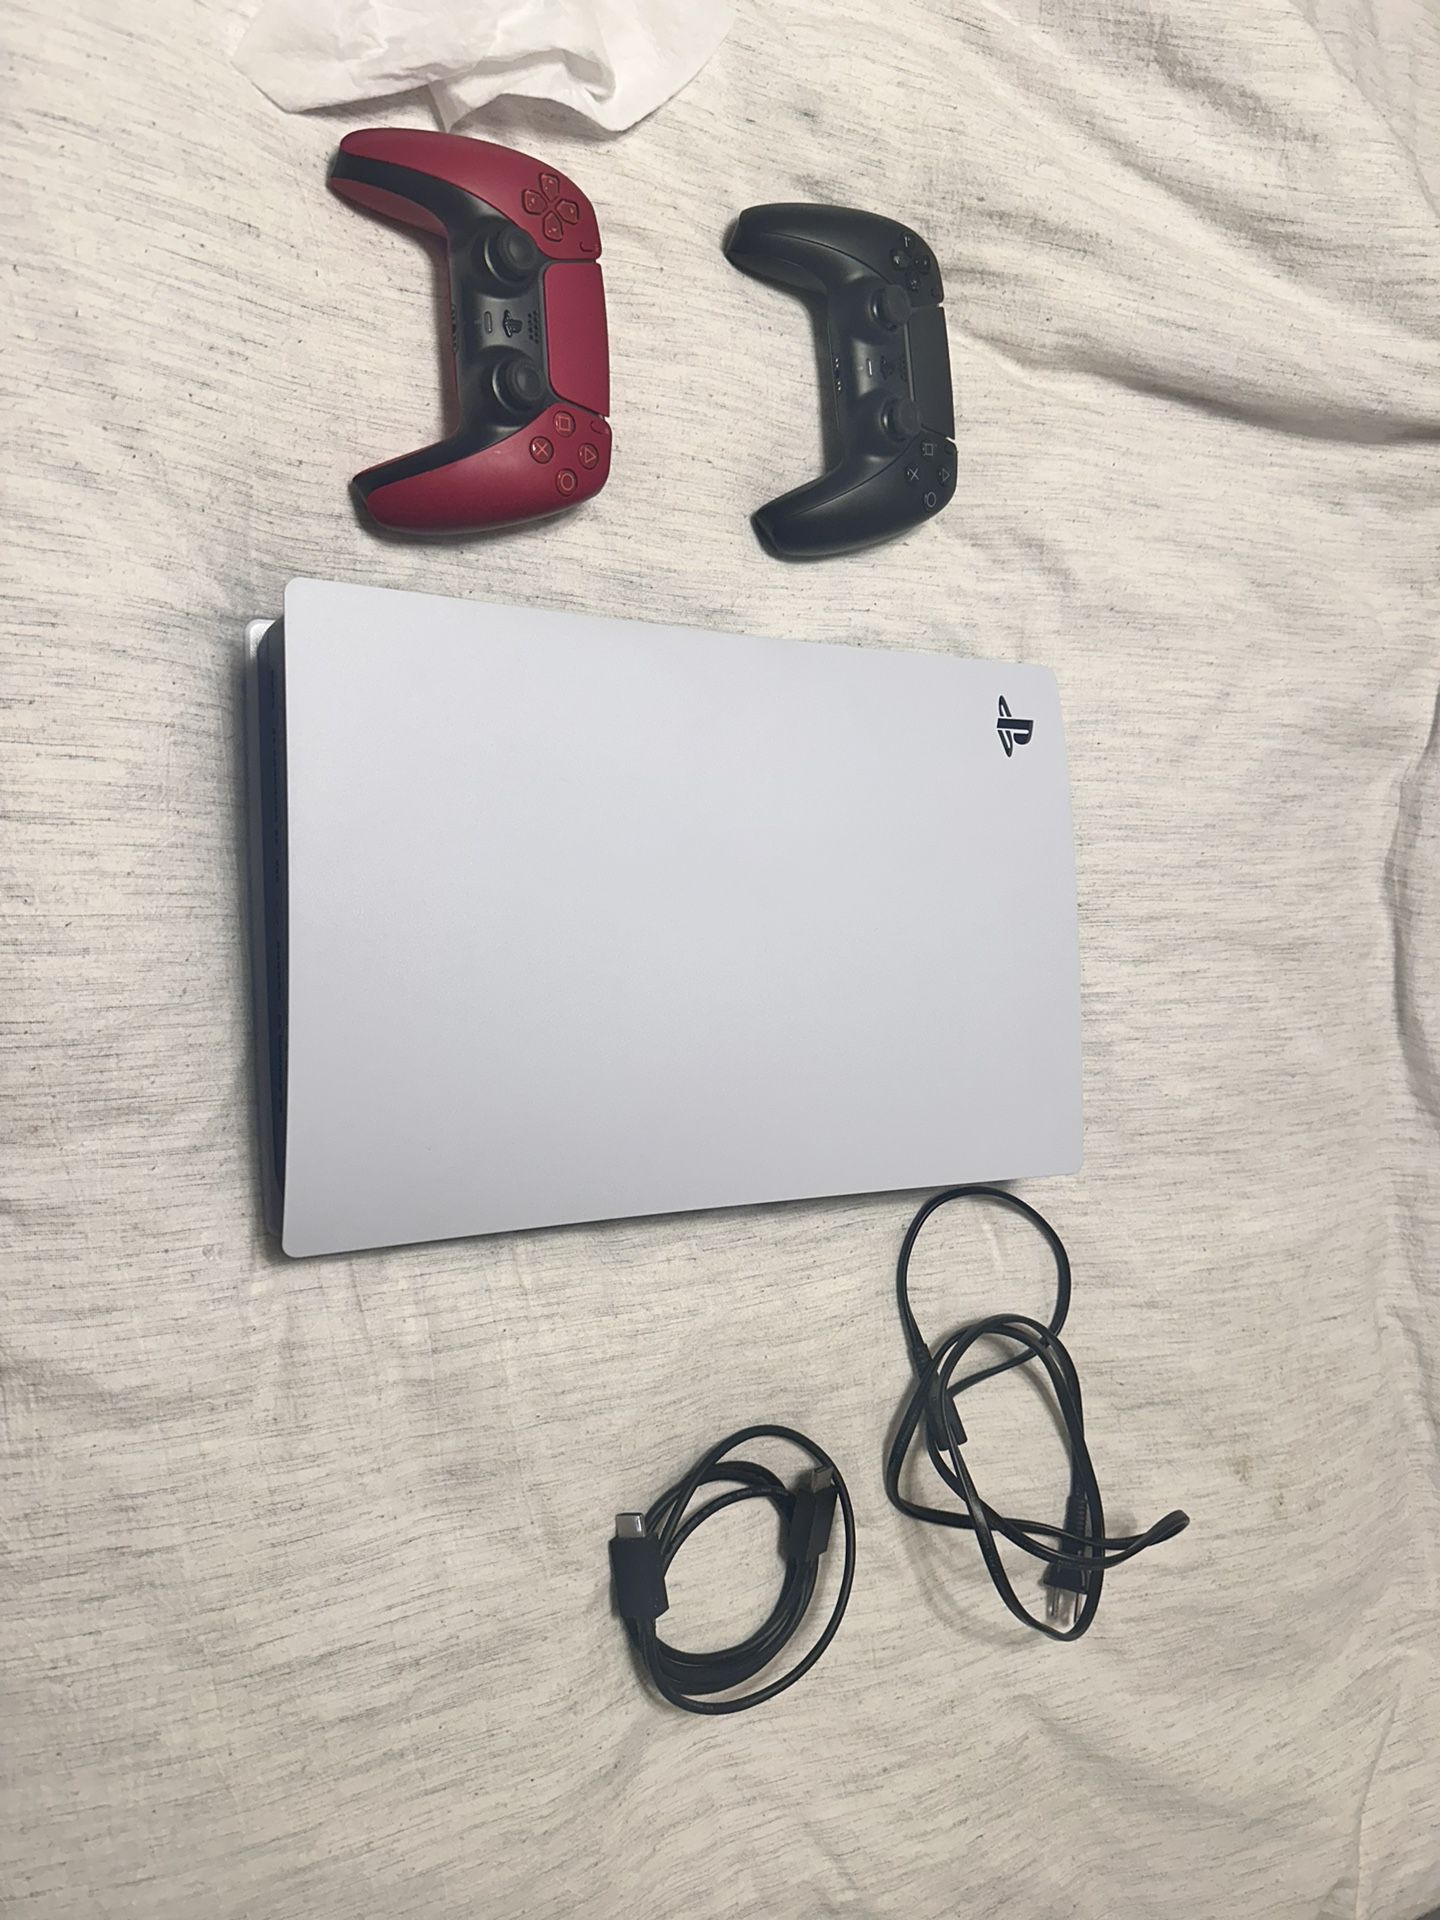 PS5 Digital Edition w/ 2 Controllers